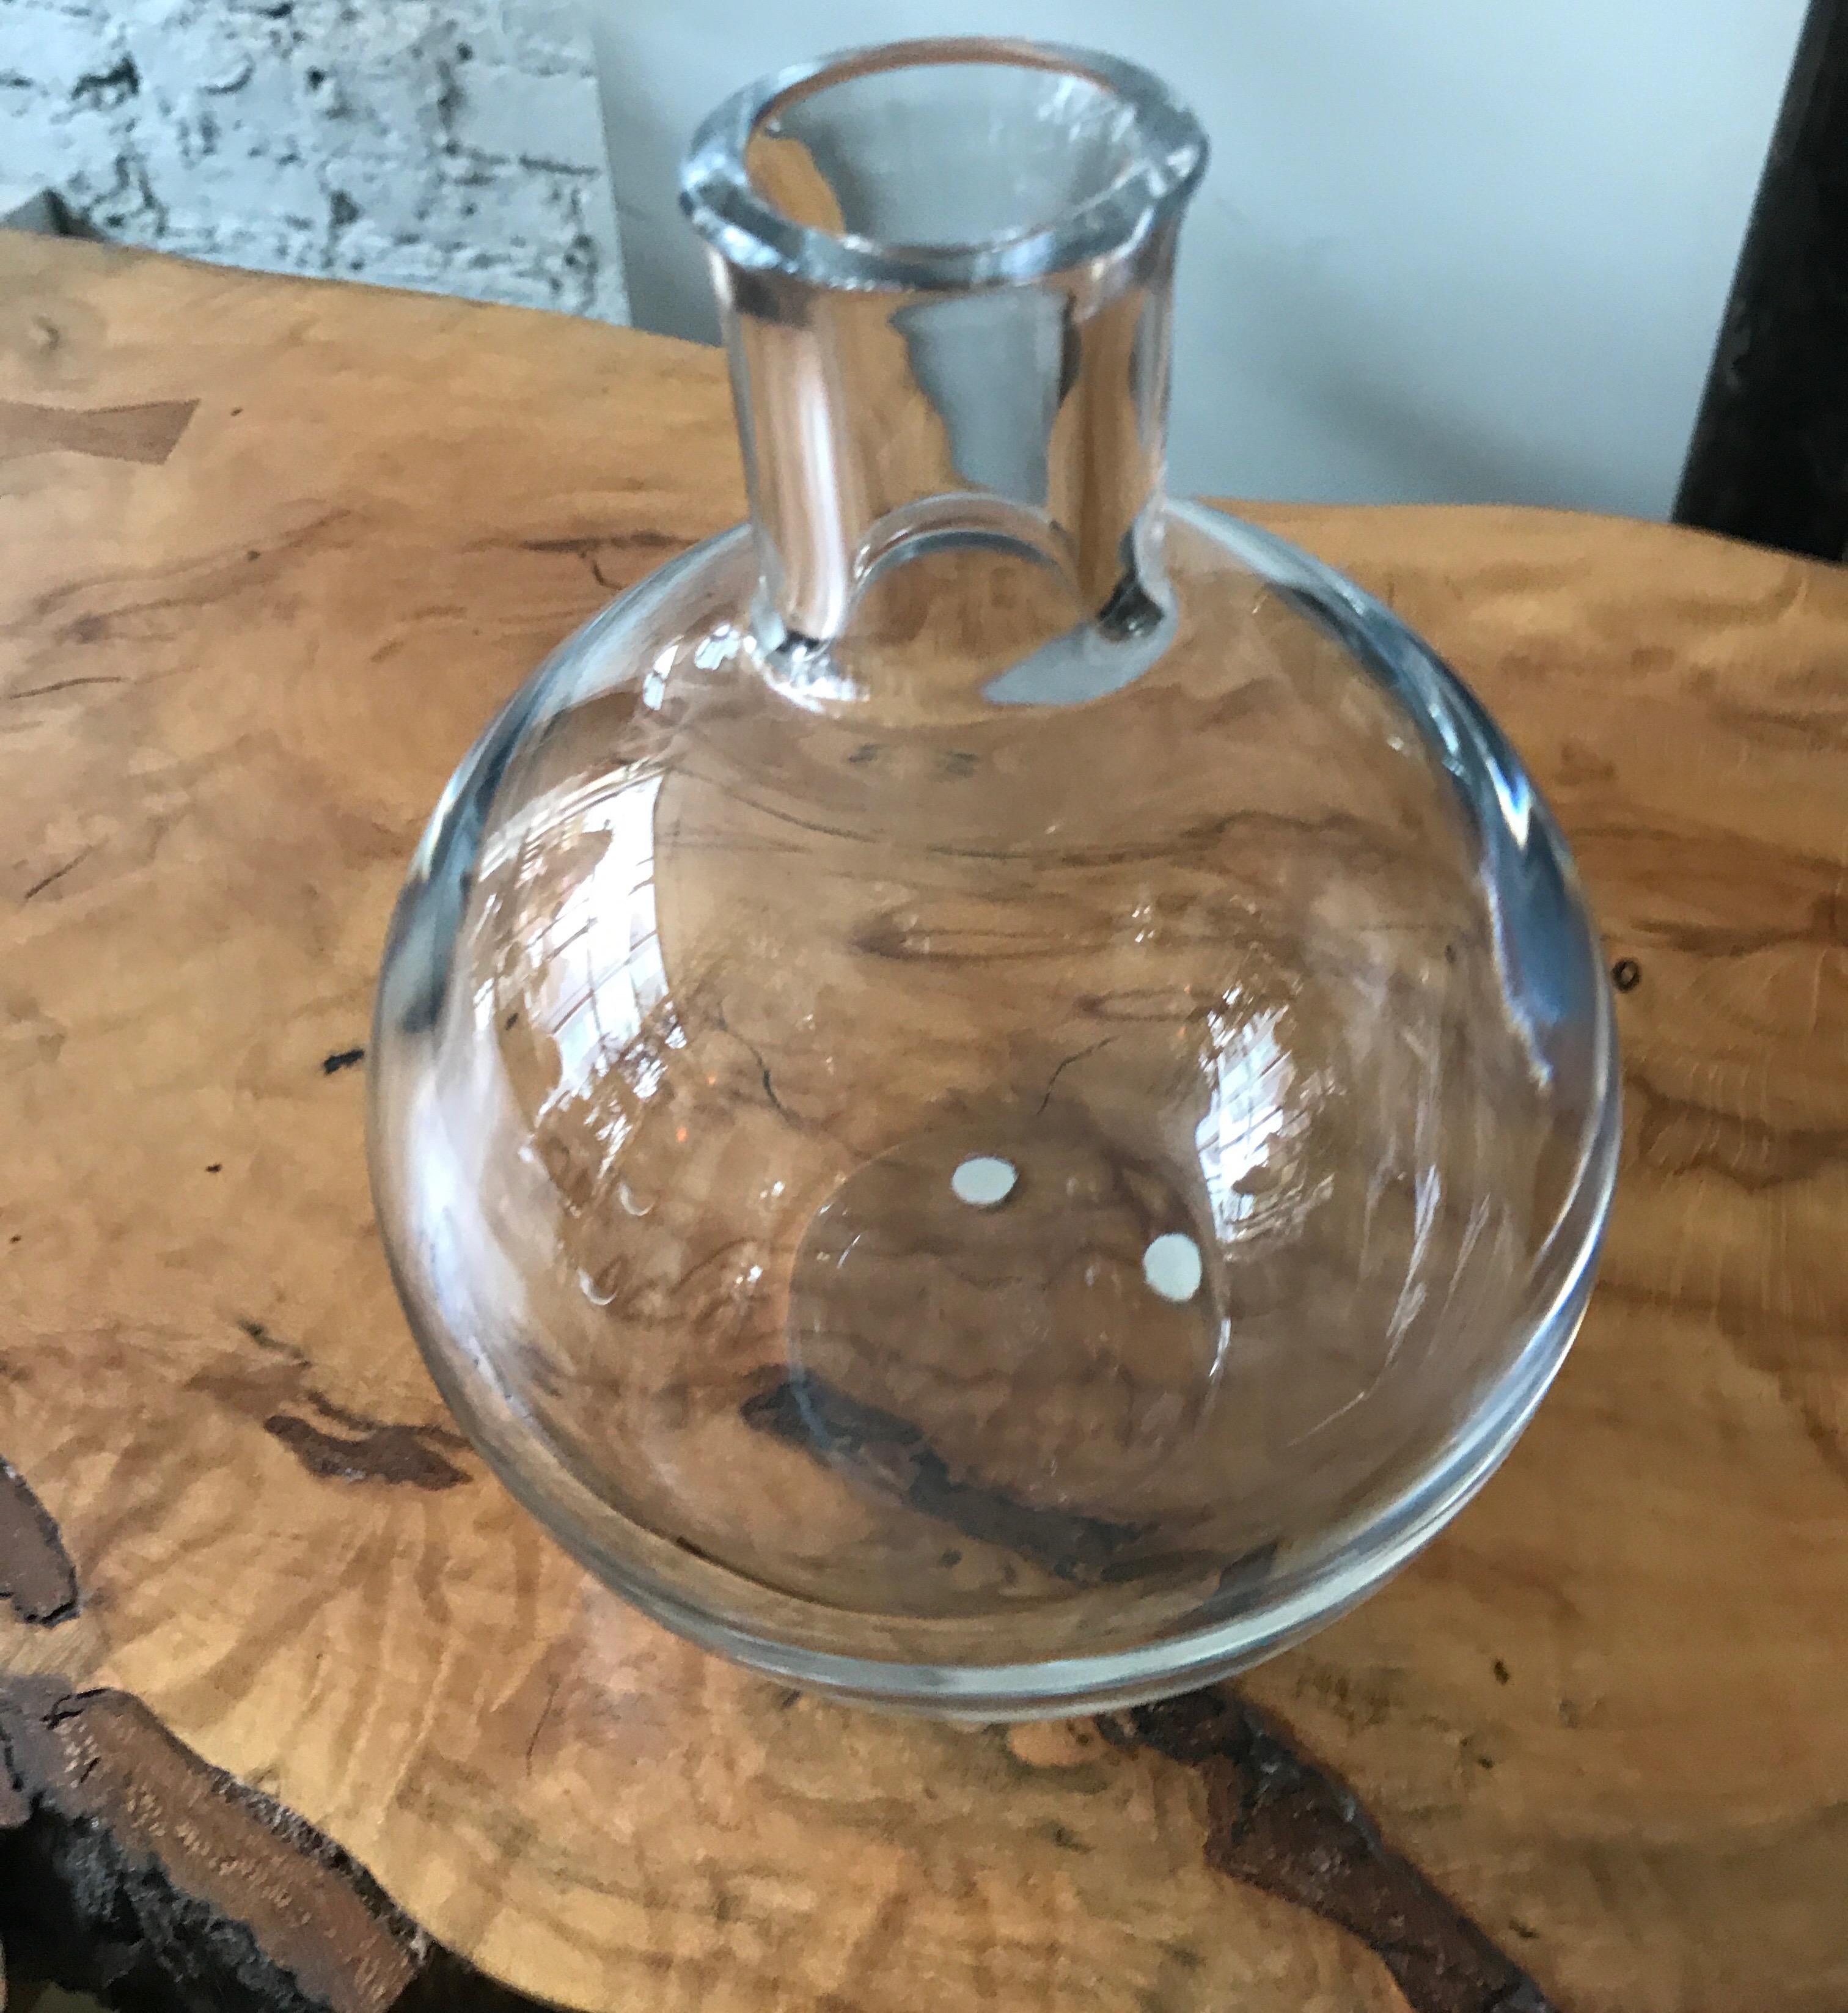 Modern clear crystal Baccarat vase made in France.
Simple elegant decorative profile is at home in any decor.
The vase is quite thick and substantial.
Stamped Baccarat France to the base.